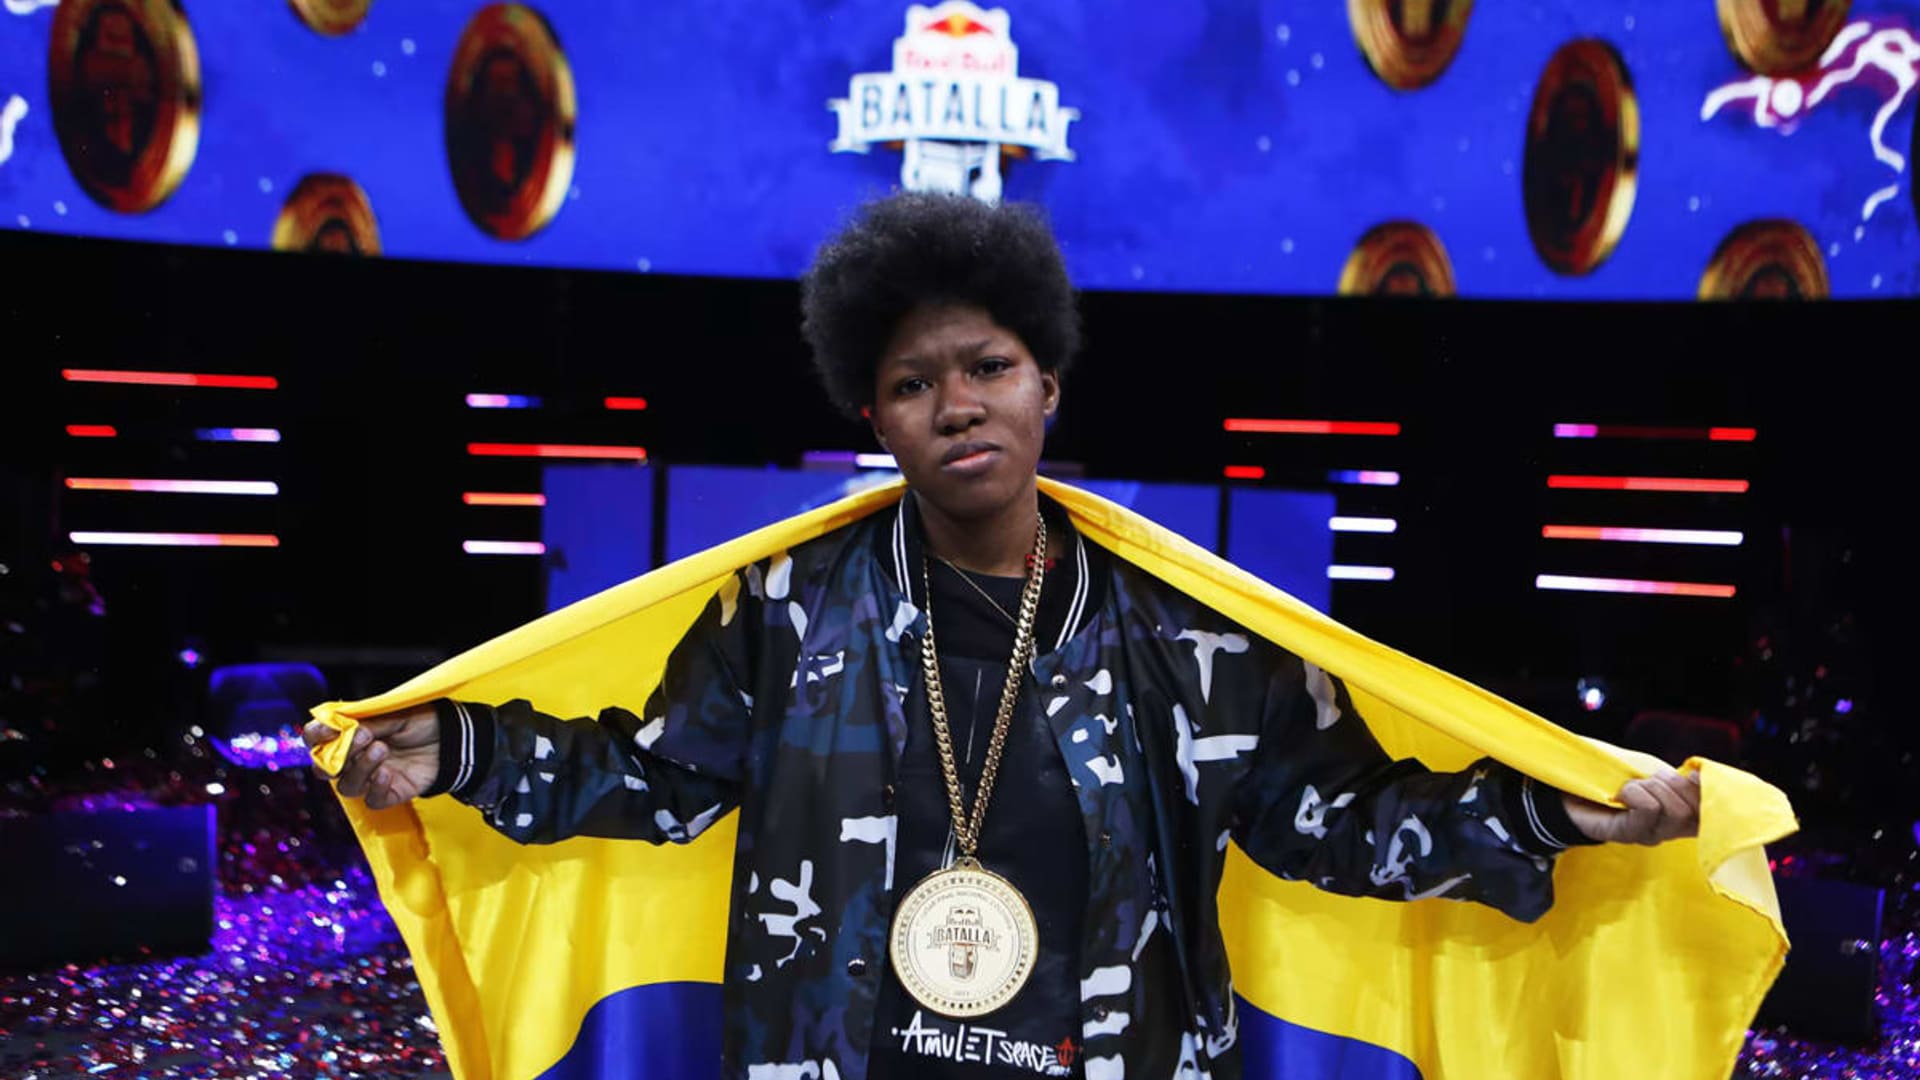 Colombia's Marithea is the only female rapper fighting for the crown at the Red Bull Batalla World Final 2021